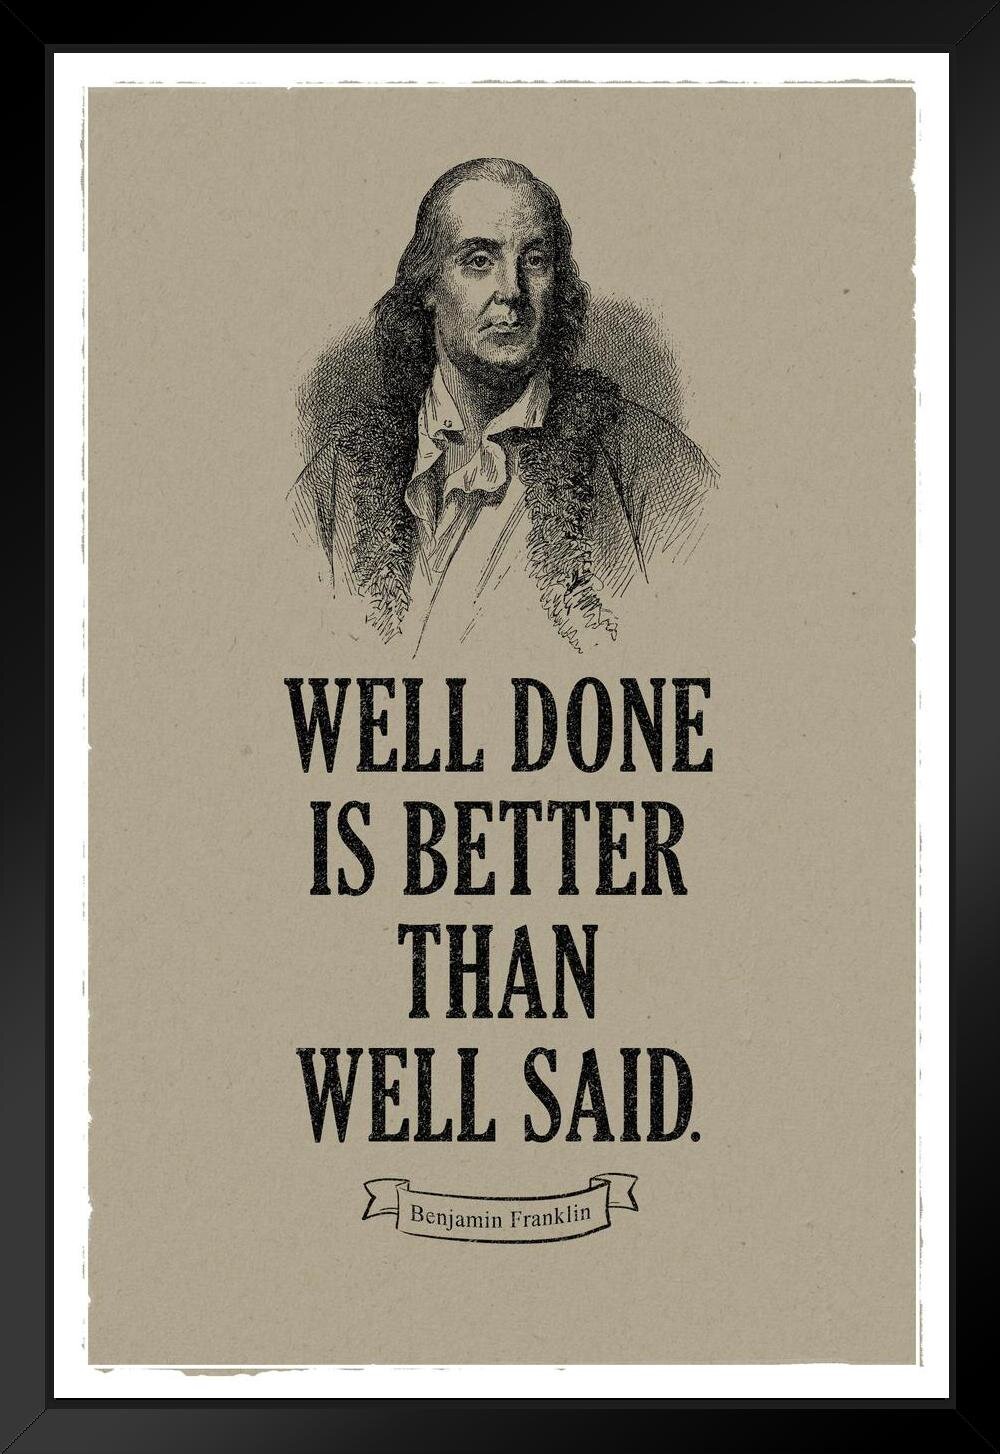 He that is good making Excuses NEW Motivational Classroom POSTER Ben Franklin 